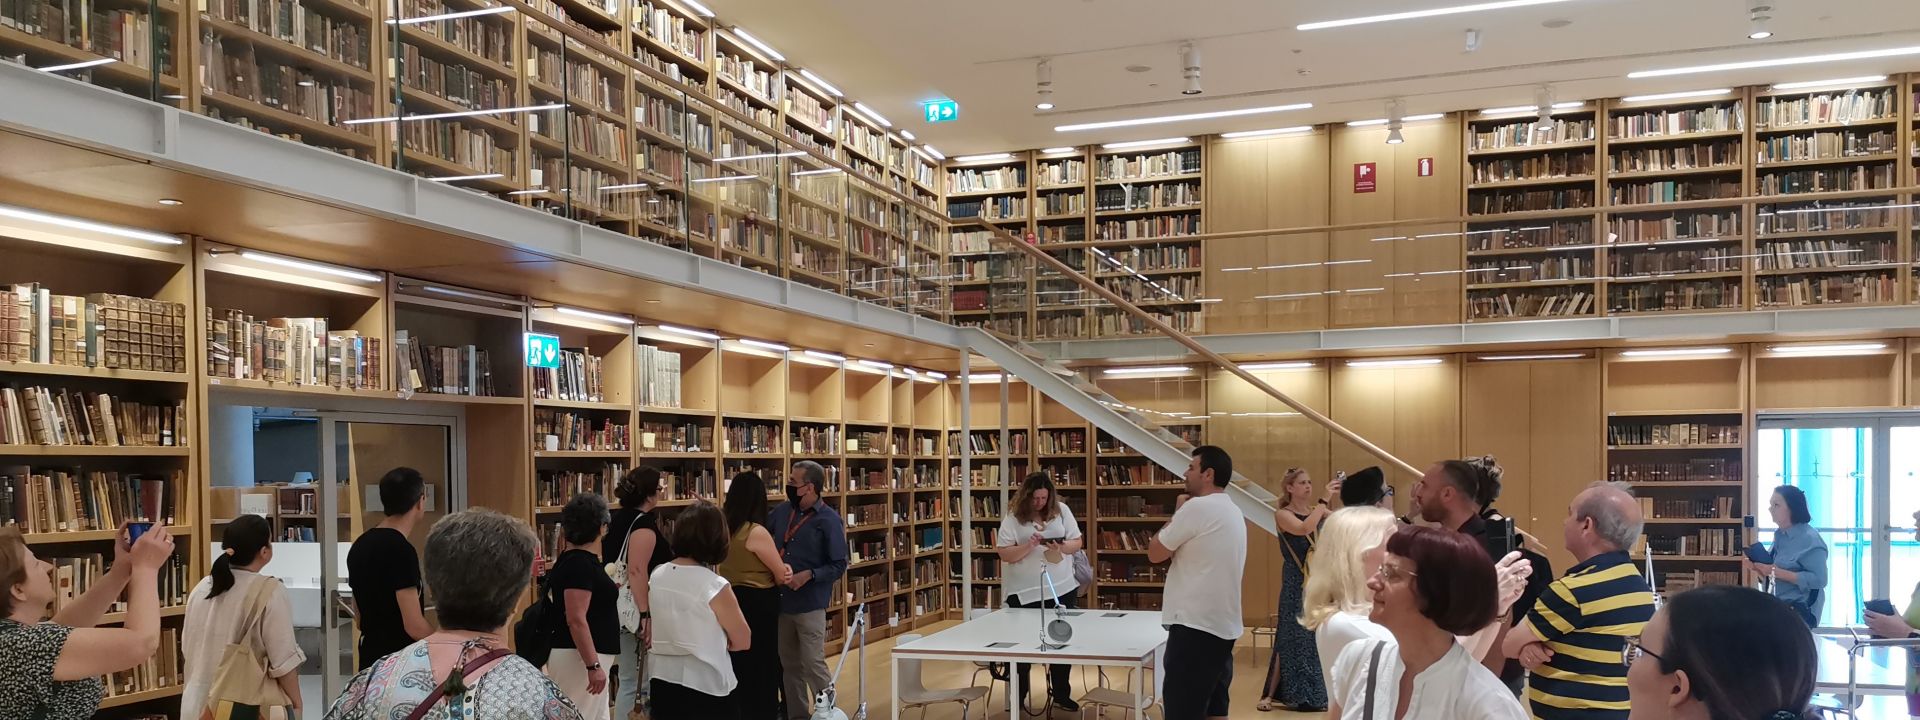 Backstage Tour of the National Library of Greece - Εικόνα